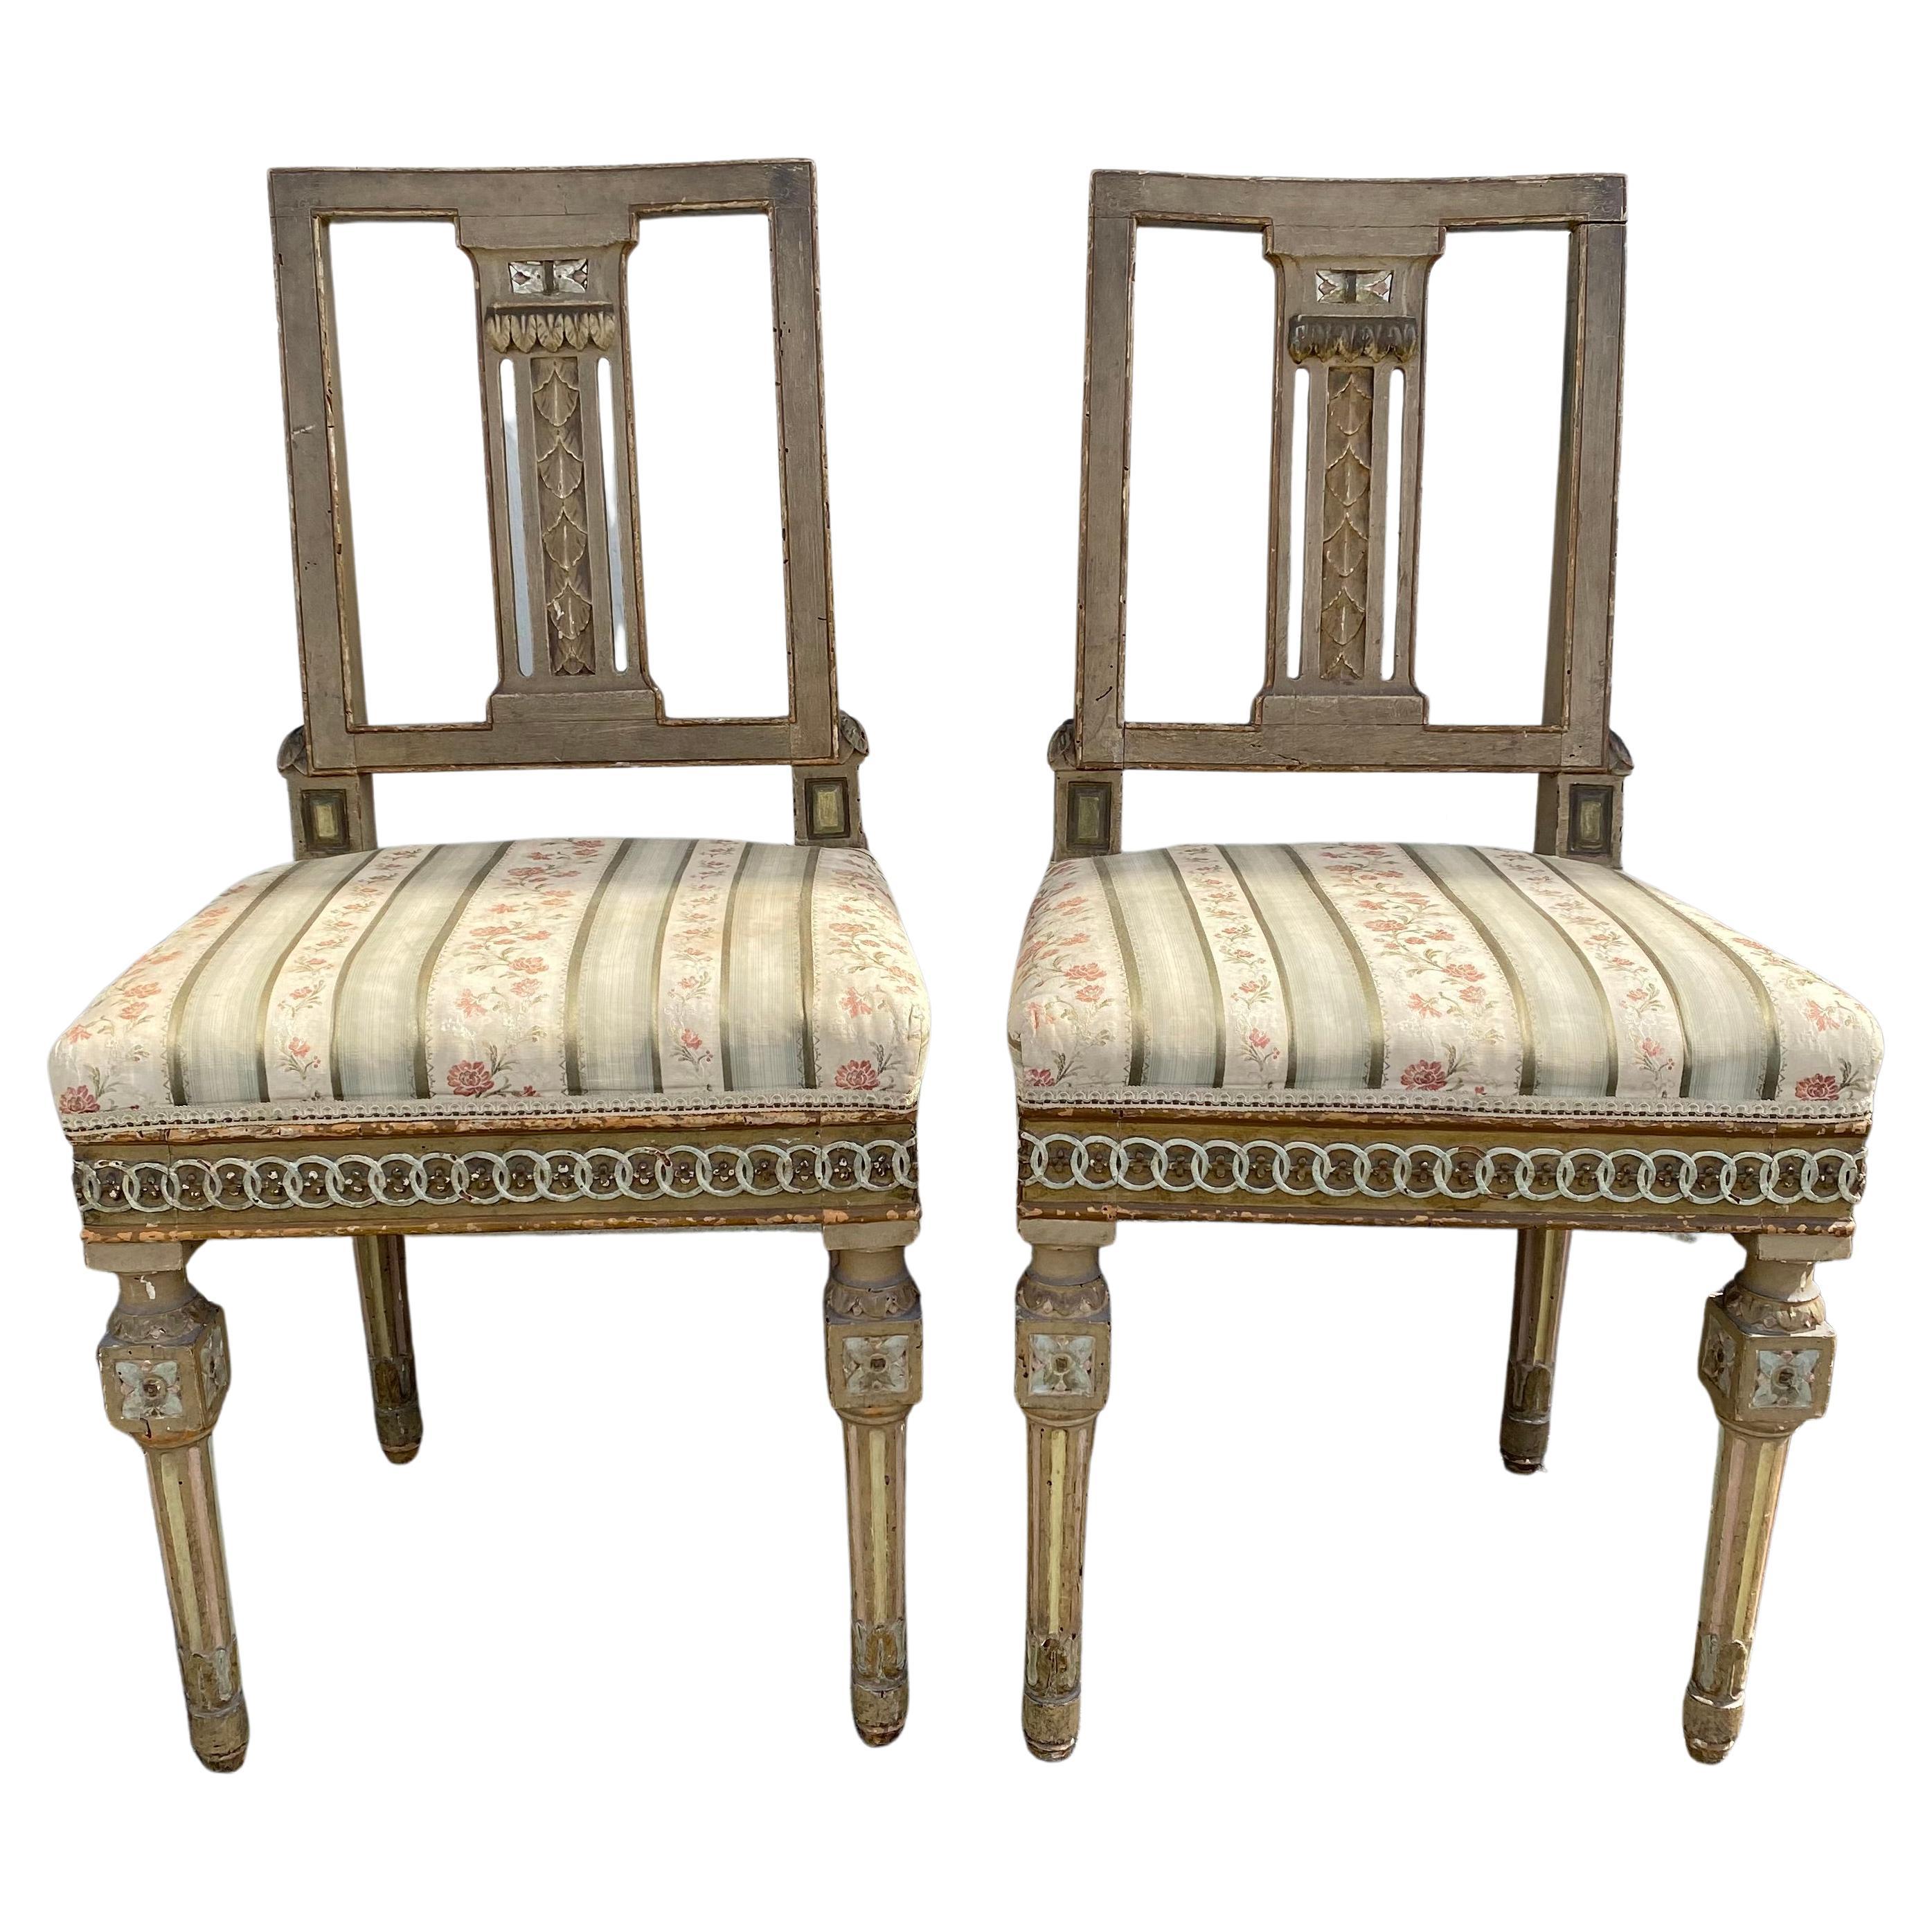 Rare Pair of Neoclassical 18th Century French Side Chairs with Original Paint